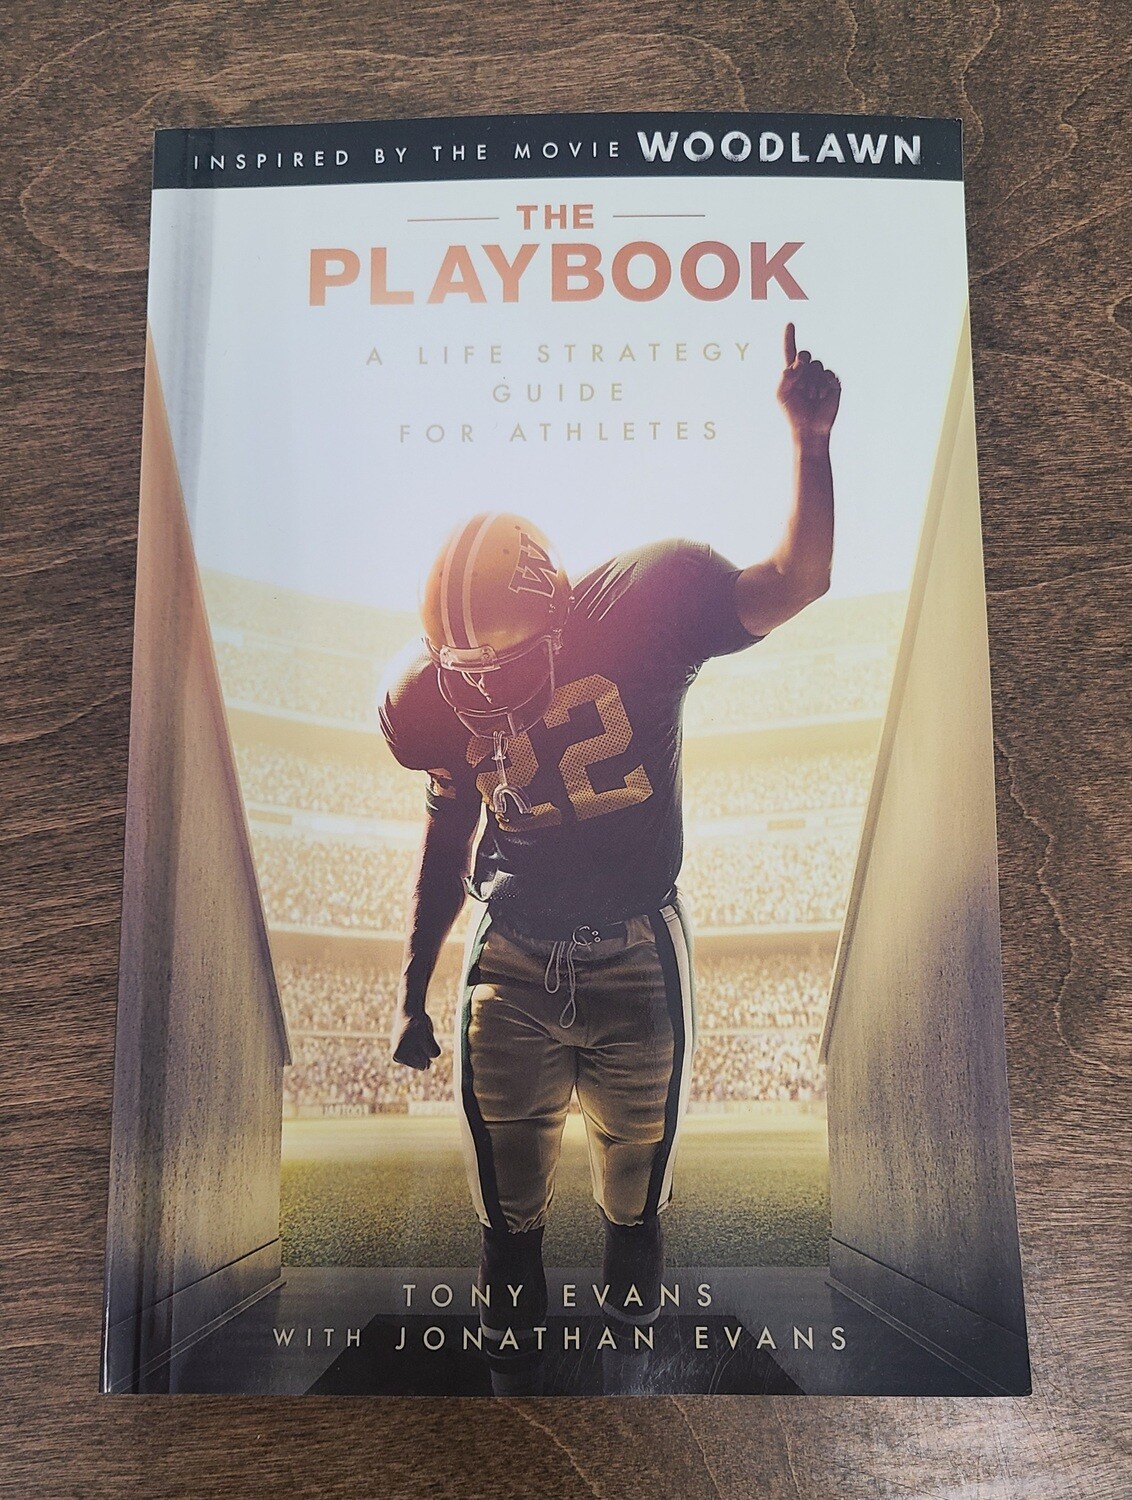 Woodlawn: The Playbook - A Life Strategy Guide for Athletes by Tony Evans with Jonathan Evans